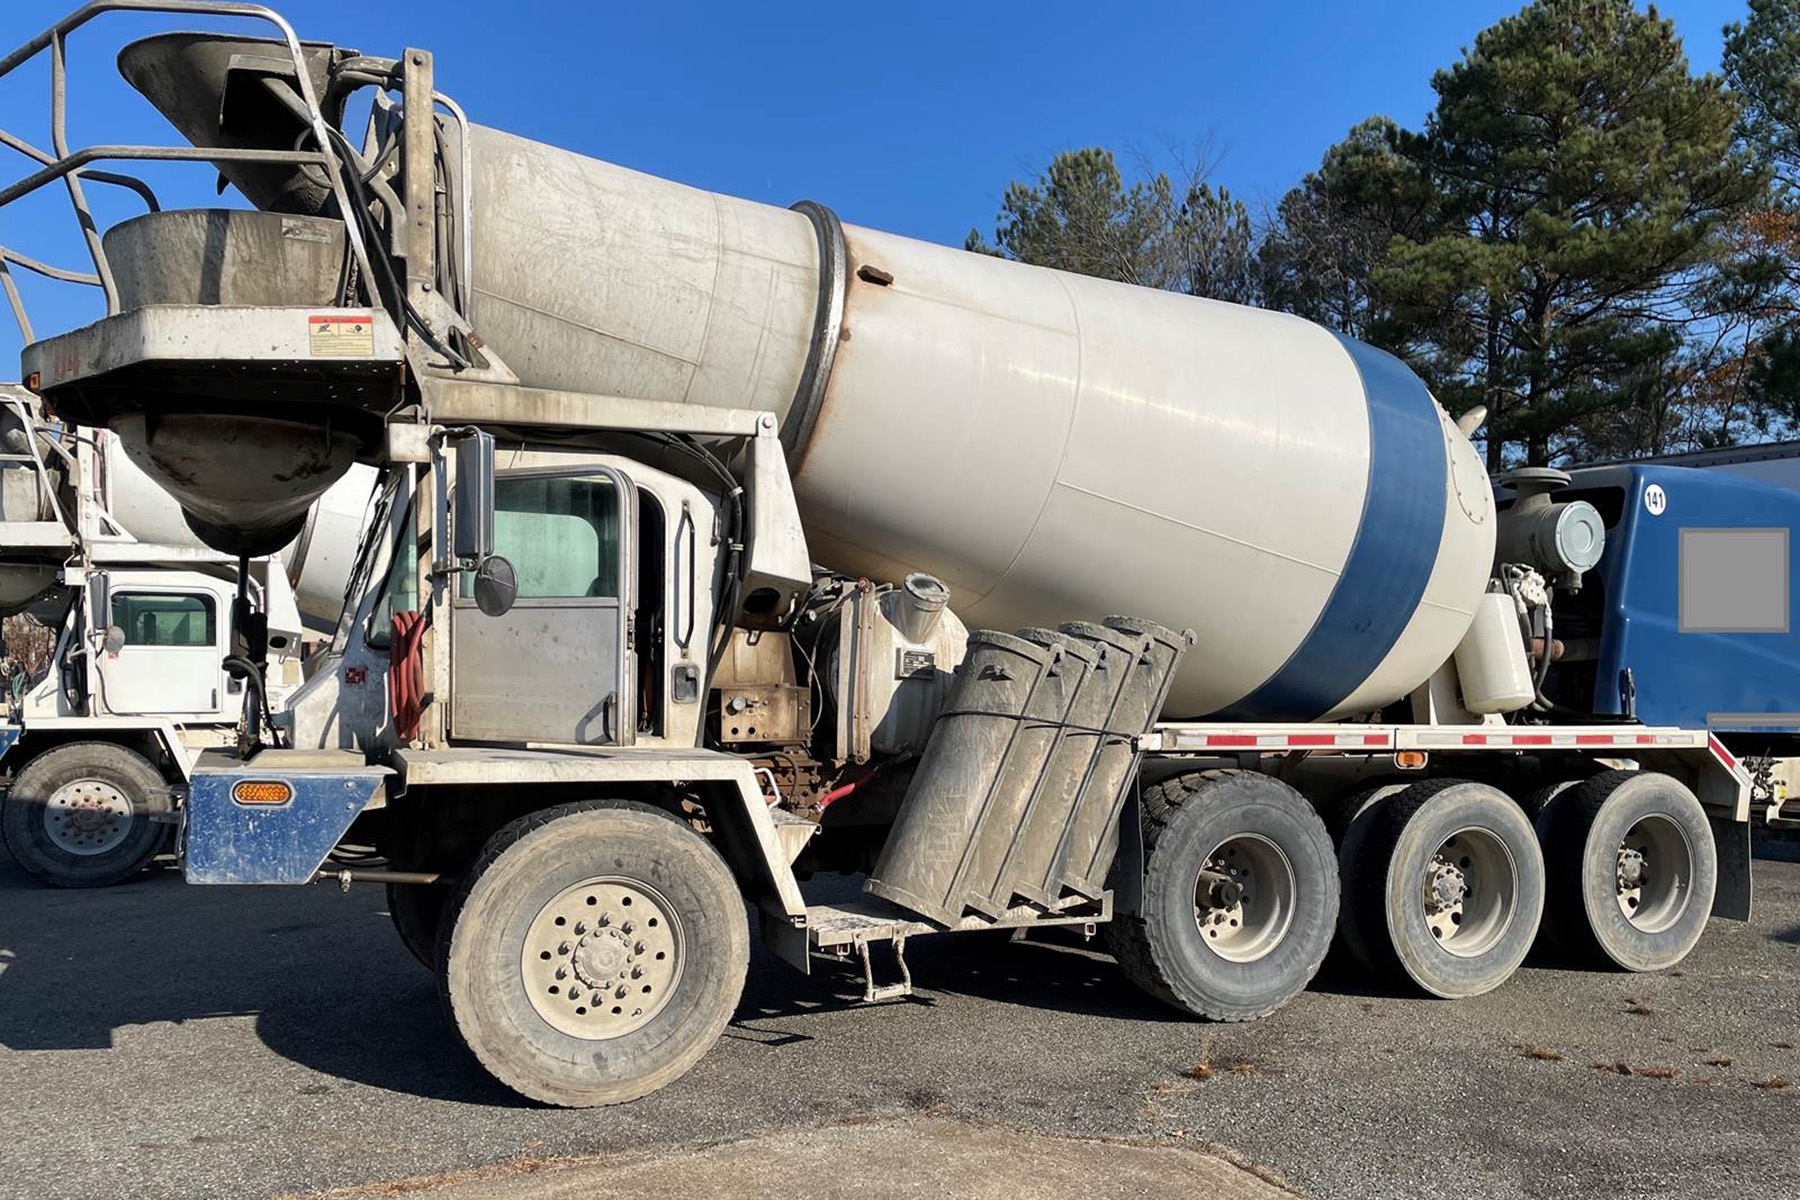 concrete cement truck holds 8-10 yards of concrete